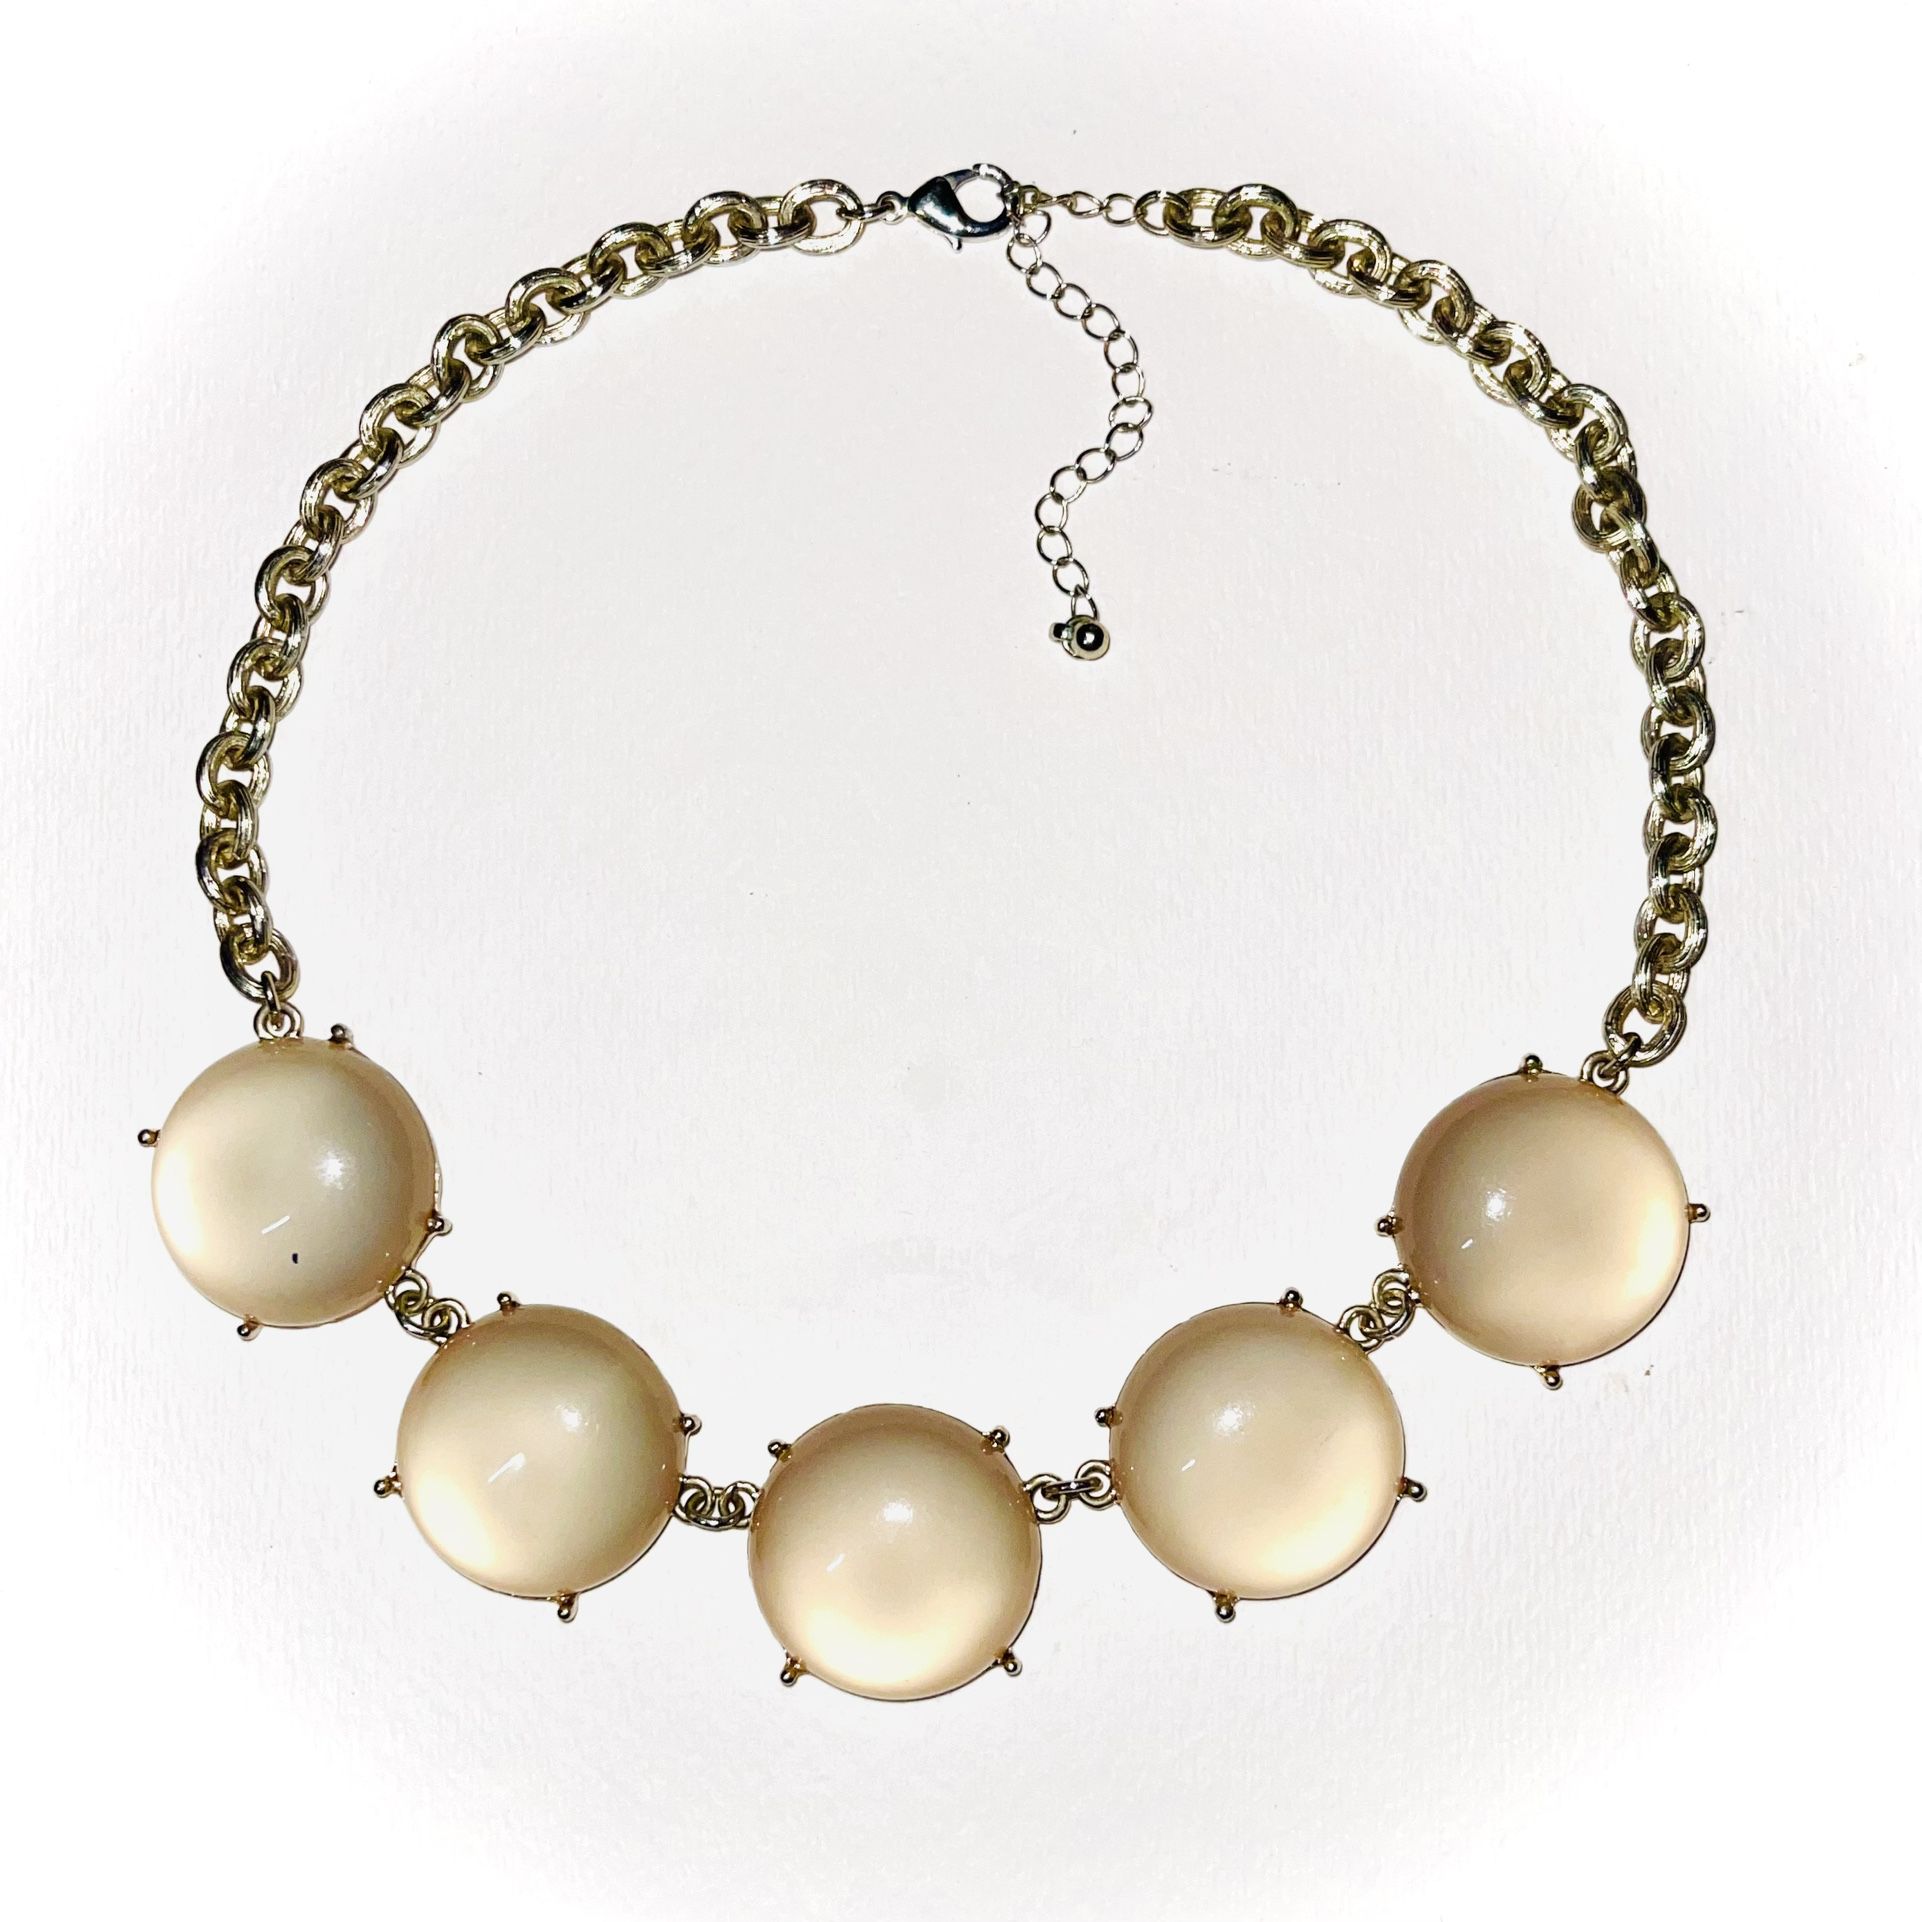 Vintage  Champagne Bubbles Moonstone Necklace 18 Inch From